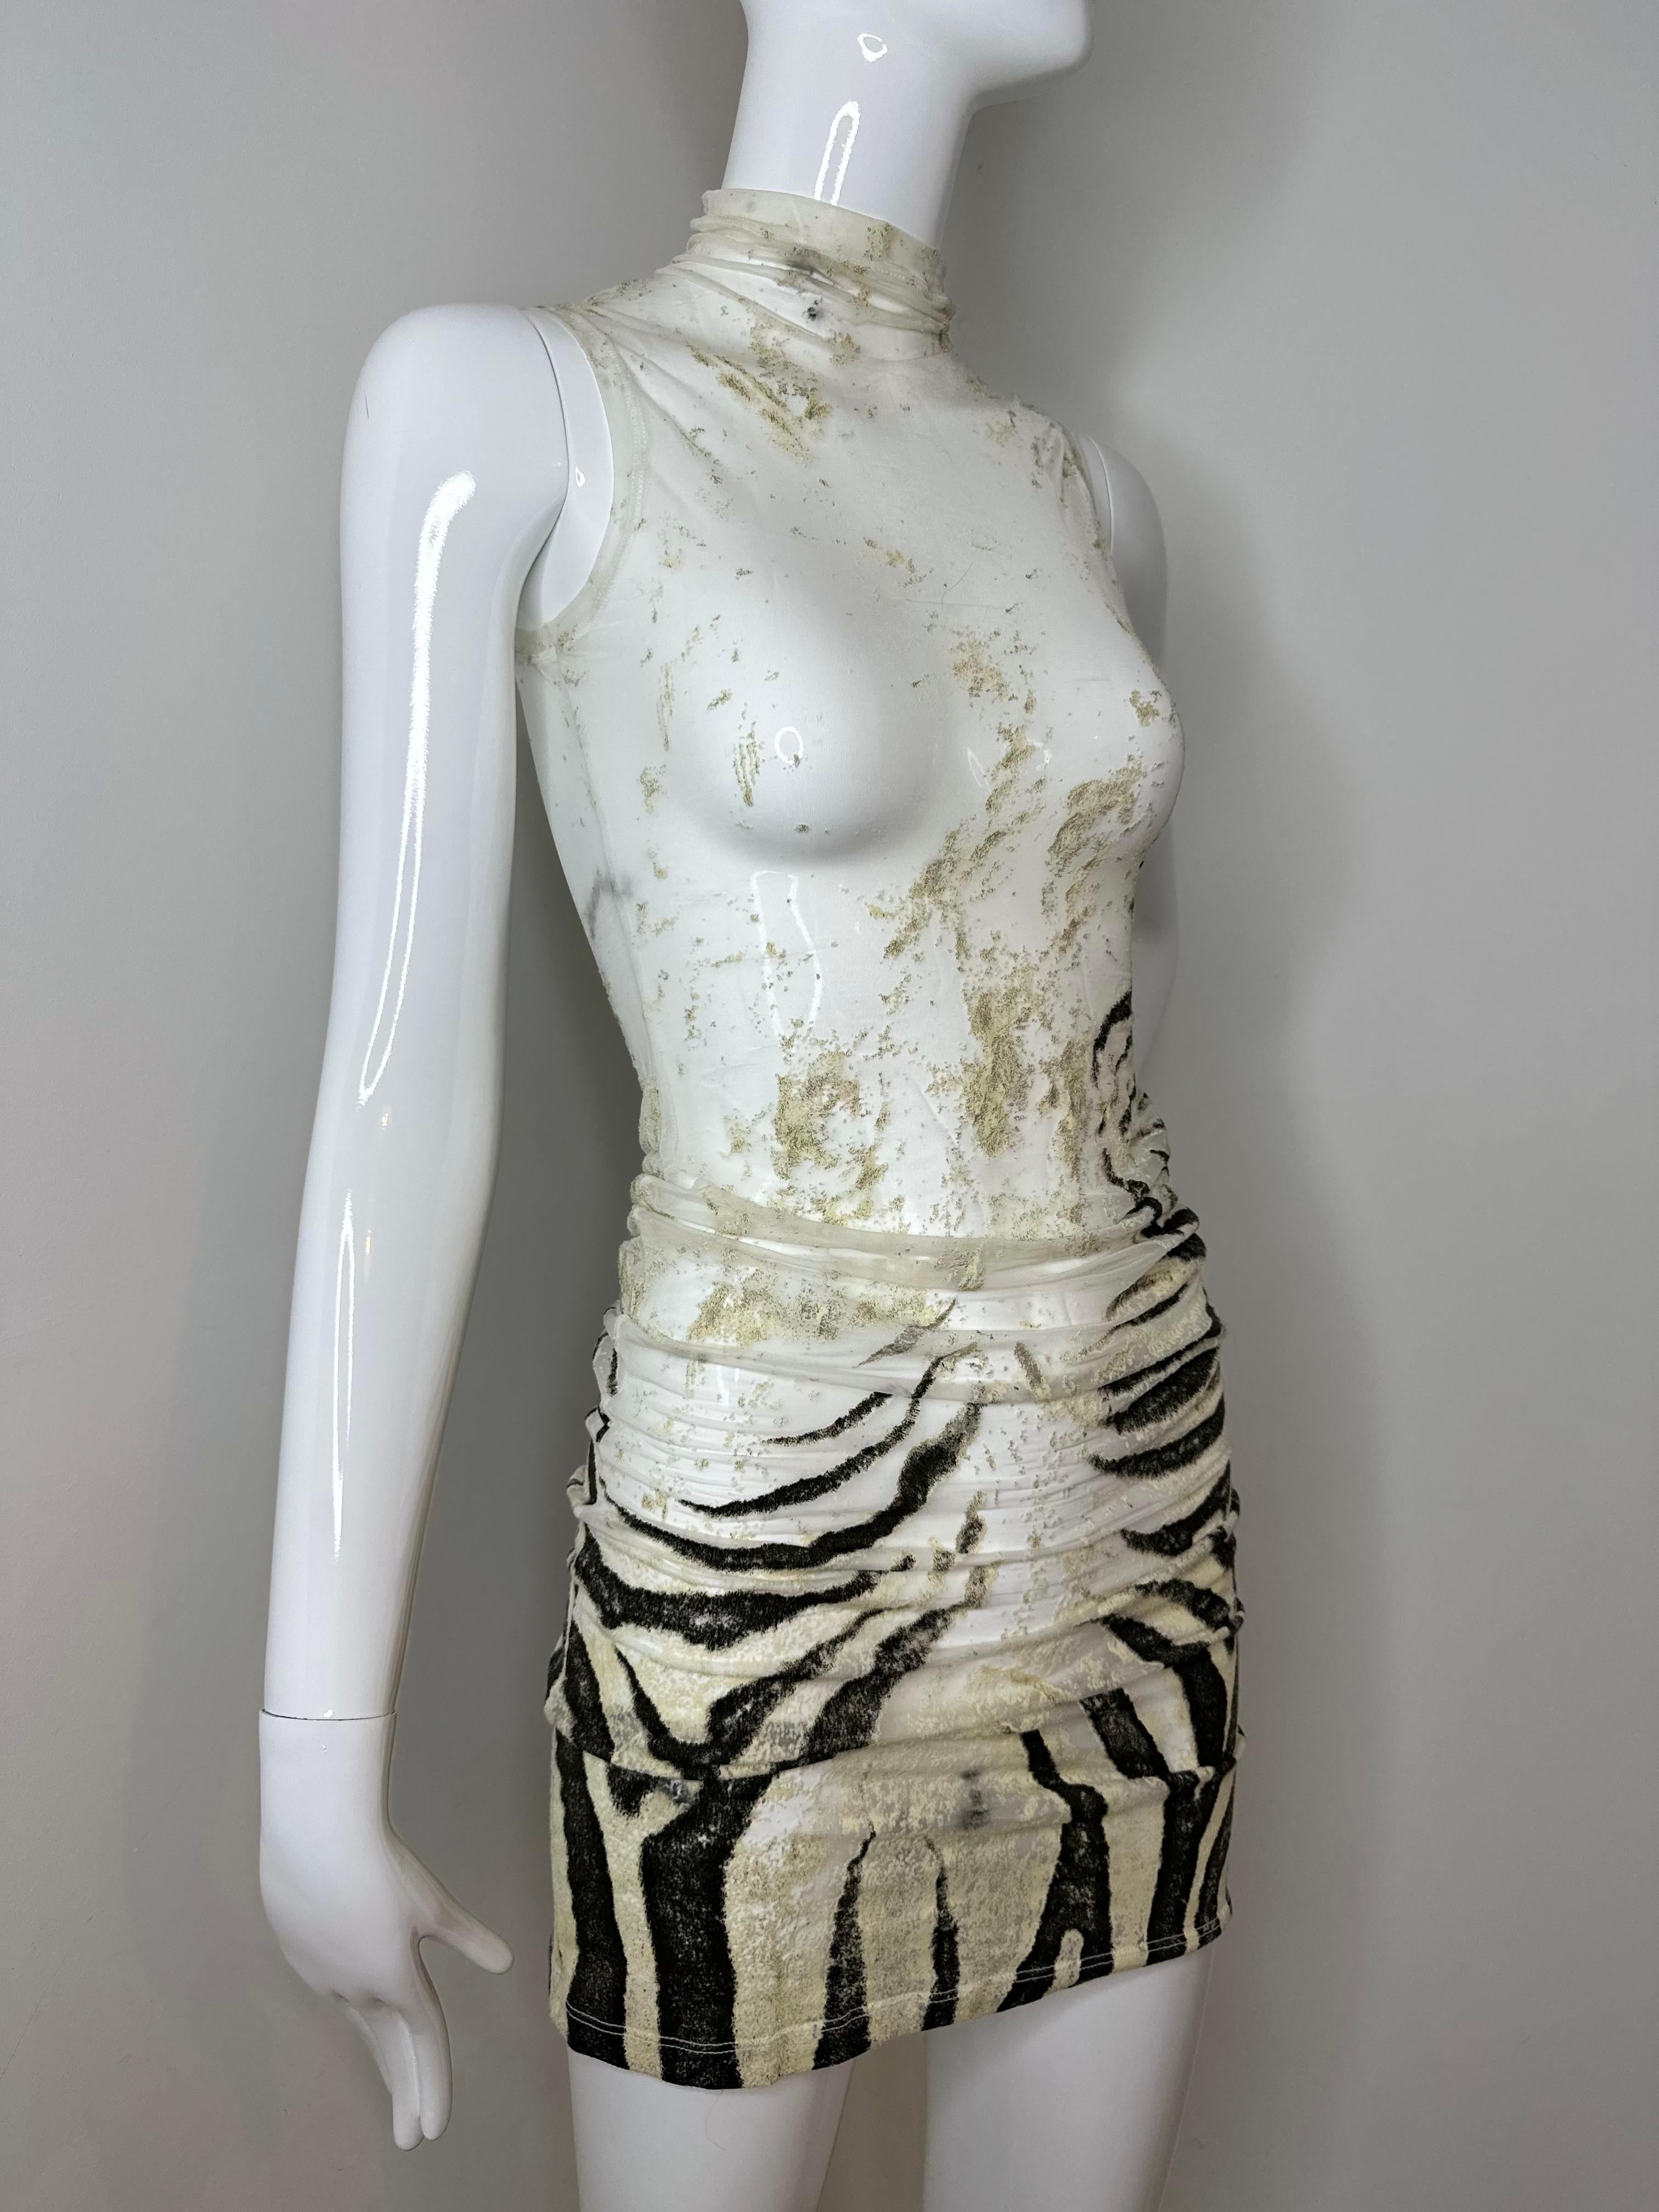 Very Rare Roberto Cavalli 1999 zebra sheer midi/mini dress 
Size S 

It hits above the knee but can be worn as a mini scrunched as shown on the mannequin 

The fabric has a few imperfections and mini rips. Everything pictured 

